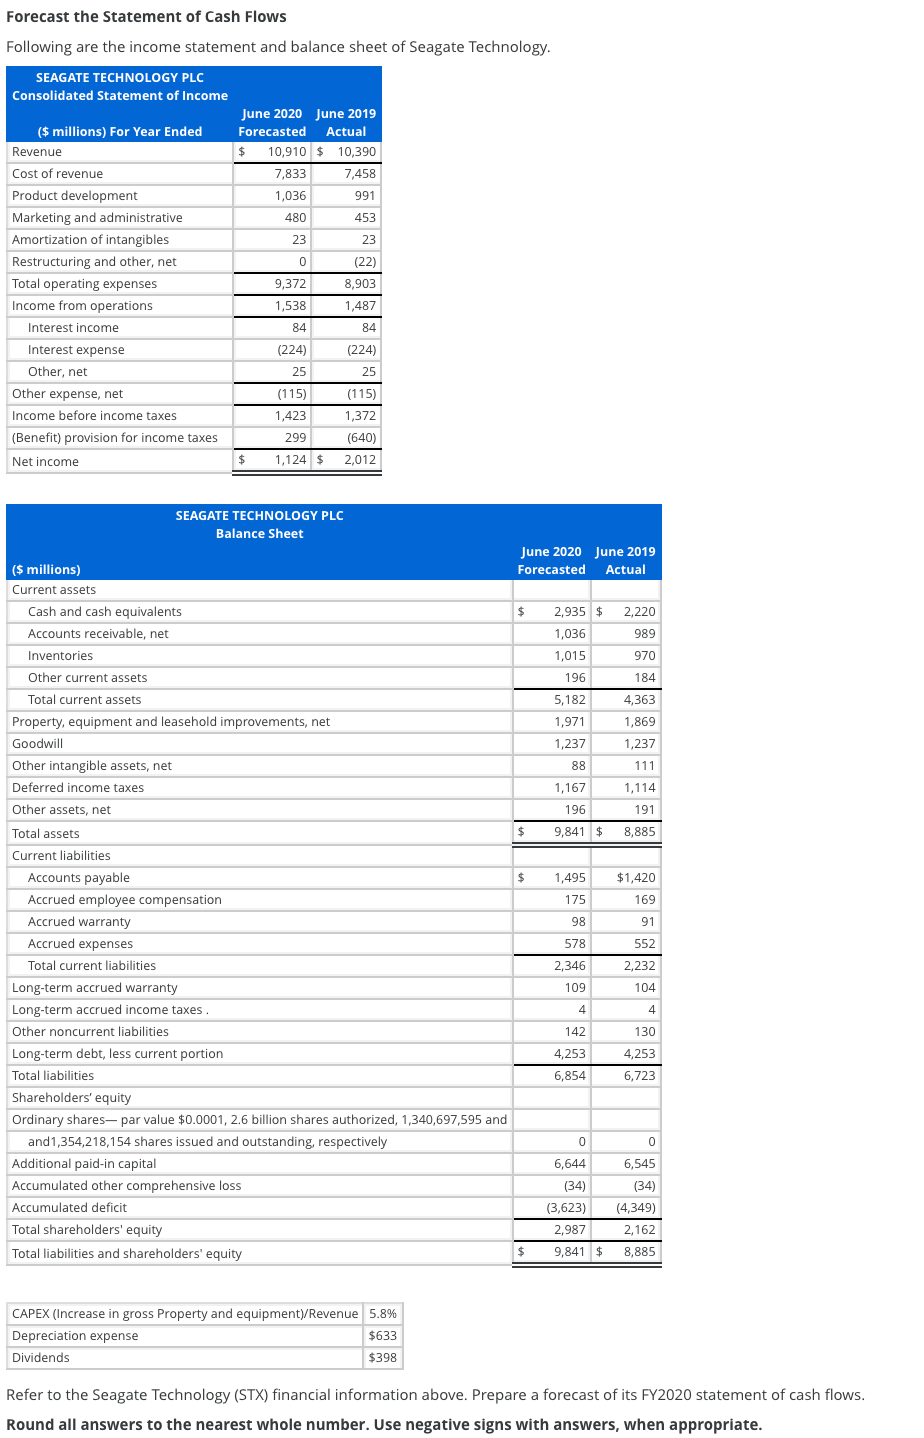 Forecast the Statement of Cash Flows
Following are the income statement and balance sheet of Seagate Technology.
SEAGATE TECHNOLOGY PLC
Consolidated Statement of Income
June 2020 June 2019
($ millions) For Year Ended
Forecasted
Actual
Revenue
$
10,910 $ 10,390
Cost of revenue
7,833
7,458
Product development
1,036
991
Marketing and administrative
480
453
Amortization of intangibles
23
23
Restructuring and other, net
(22)
Total operating expenses
9,372
8,903
Income from operations
1,538
1,487
Interest income
84
84
Interest expense
(224)
(224)
Other, net
25
25
Other expense, net
(115)
(115)
Income before income taxes
1,423
1,372
(Benefit) provision for income taxes
299
(640)
Net income
$4
1,124 $ 2,012
SEAGATE TECHNOLOGY PLC
Balance Sheet
June 2020 June 2019
Actual
|($ millions)
Forecasted
Current assets
Cash and cash equivalents
$
2,935 $ 2,220
Accounts receivable, net
1,036
989
Inventories
1,015
970
Other current assets
196
184
Total current assets
5,182
4,363
Property, equipment and leasehold improvements, net
1,971
1,869
Goodwill
1,237
1,237
Other intangible assets, net
88
111
Deferred income taxes
1,167
1,114
Other assets, net
196
191
Total assets
24
9,841 $
8,885
Current liabilities
Accounts payable
1,495
$1,420
Accrued employee compensation
175
169
Accrued warranty
98
91
Accrued expenses
578
552
Total current liabilities
2,346
2,232
Long-term accrued warranty
109
104
Long-term accrued income taxes
4
4
Other noncurrent liabilities
142
130
Long-term debt, less current portion
4,253
4,253
Total liabilities
6,854
6,723
Shareholders' equity
Ordinary shares- par value $0.0001, 2.6 billion shares authorized, 1,340,697,595 and
and1,354,218,154 shares issued and outstanding, respectively
Additional paid-in capital
6,644
6,545
Accumulated other comprehensive loss
(34)
(34)
Accumulated deficit
(3,623)
(4,349)
Total shareholders' equity
2,987
2,162
Total liabilities and shareholders' equity
9,841 $
8,885
CAPEX (Increase in gross Property and equipment)/Revenue 5.8%
Depreciation expense
$633
Dividends
$398
Refer to the Seagate Technology (STX) financial information above. Prepare a forecast of its FY2020 statement of cash flows.
Round all answers to the nearest whole number. Use negative signs with answers, when appropriate.
